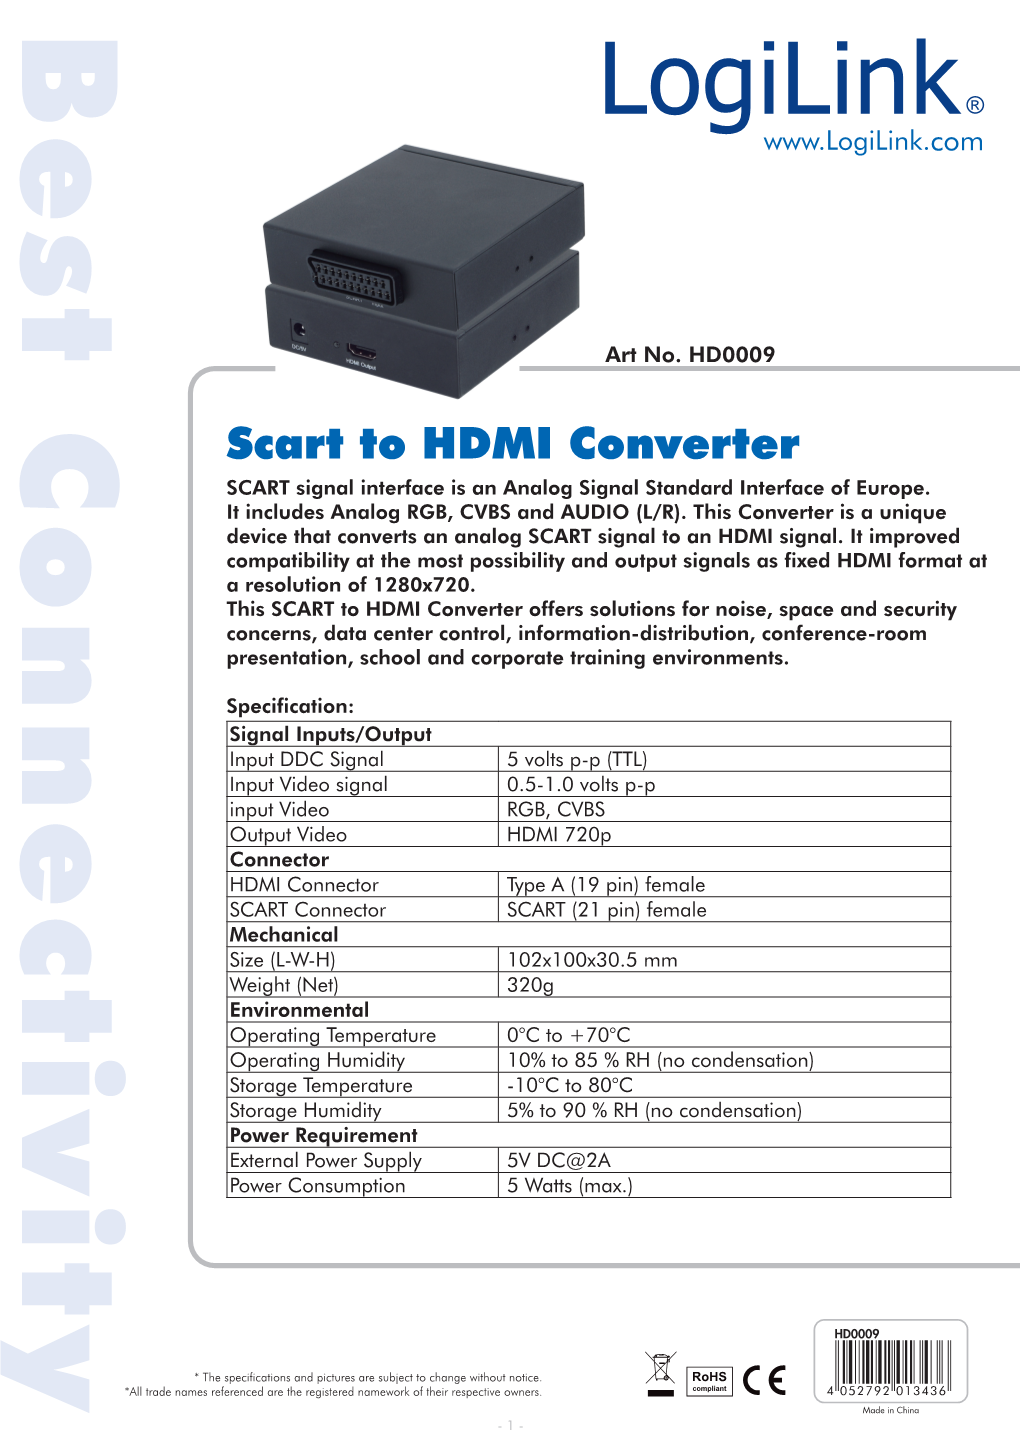 SCART to HDMI Converter Information-Distribution,Concerns, Data Center Control, Conference-Room Training Environments